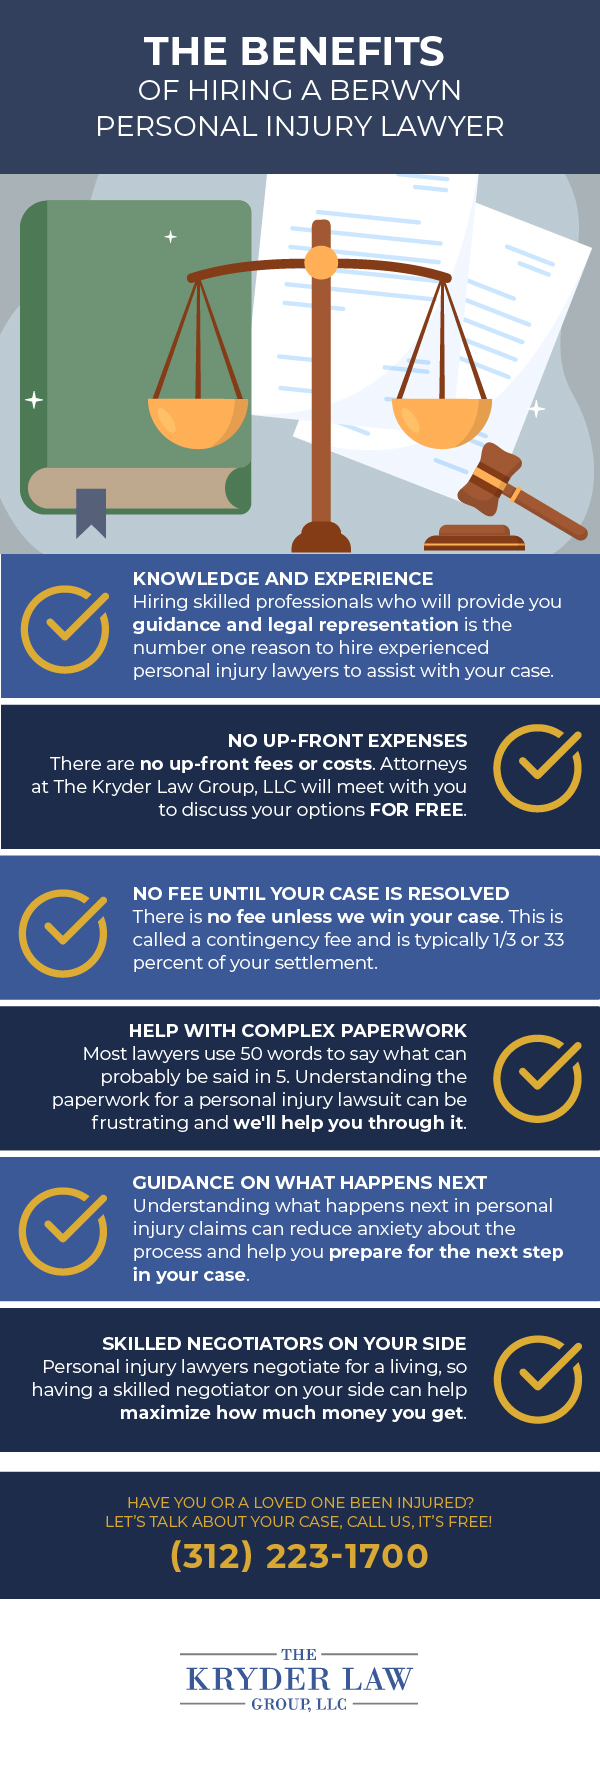 The Benefits of Hiring a Berwyn Personal Injury Lawyer Infographic